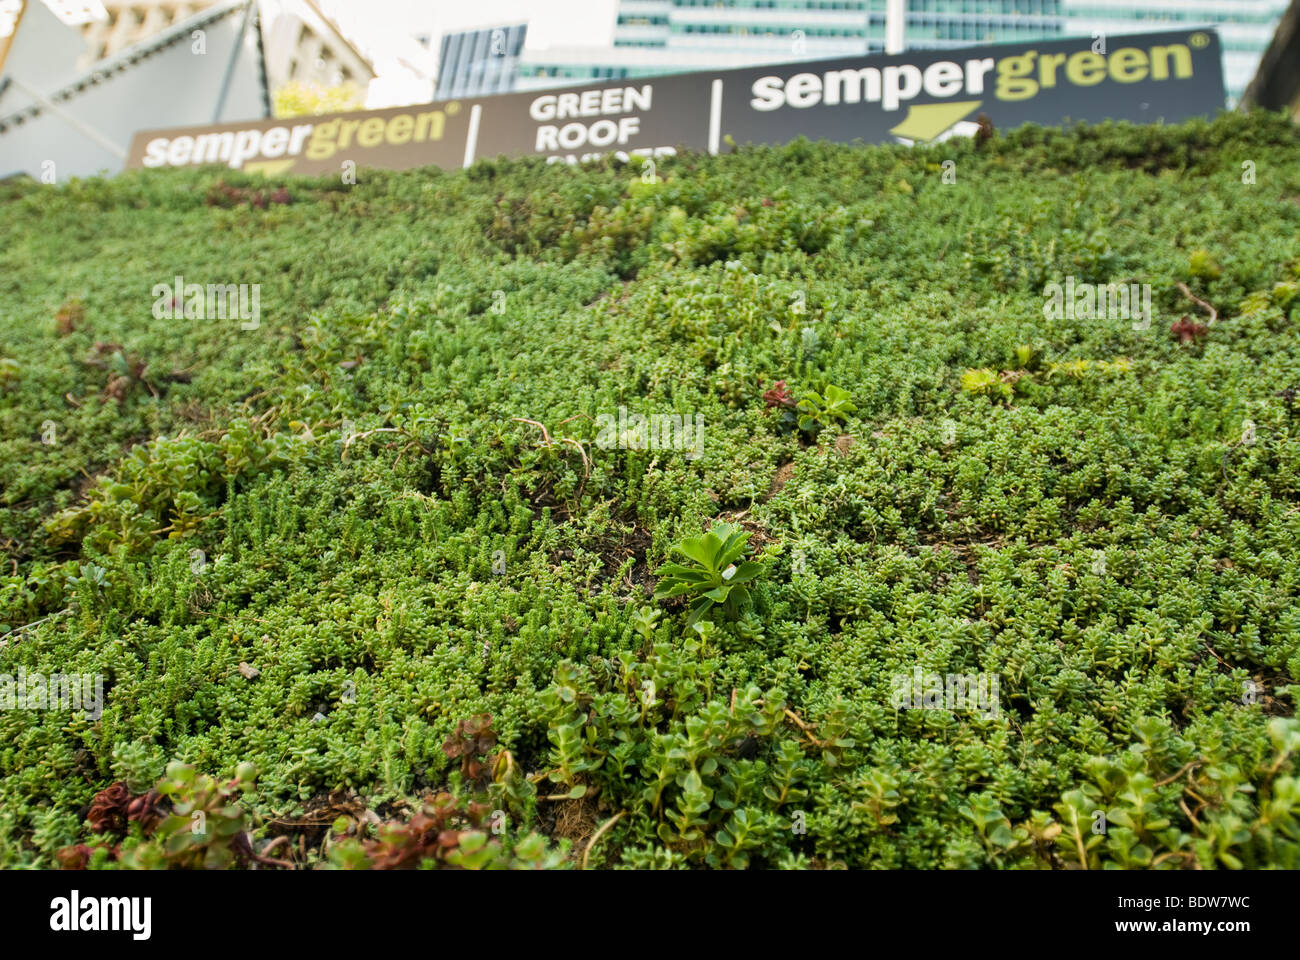 Display of sedum covered vegetation blankets for green roofs Stock Photo